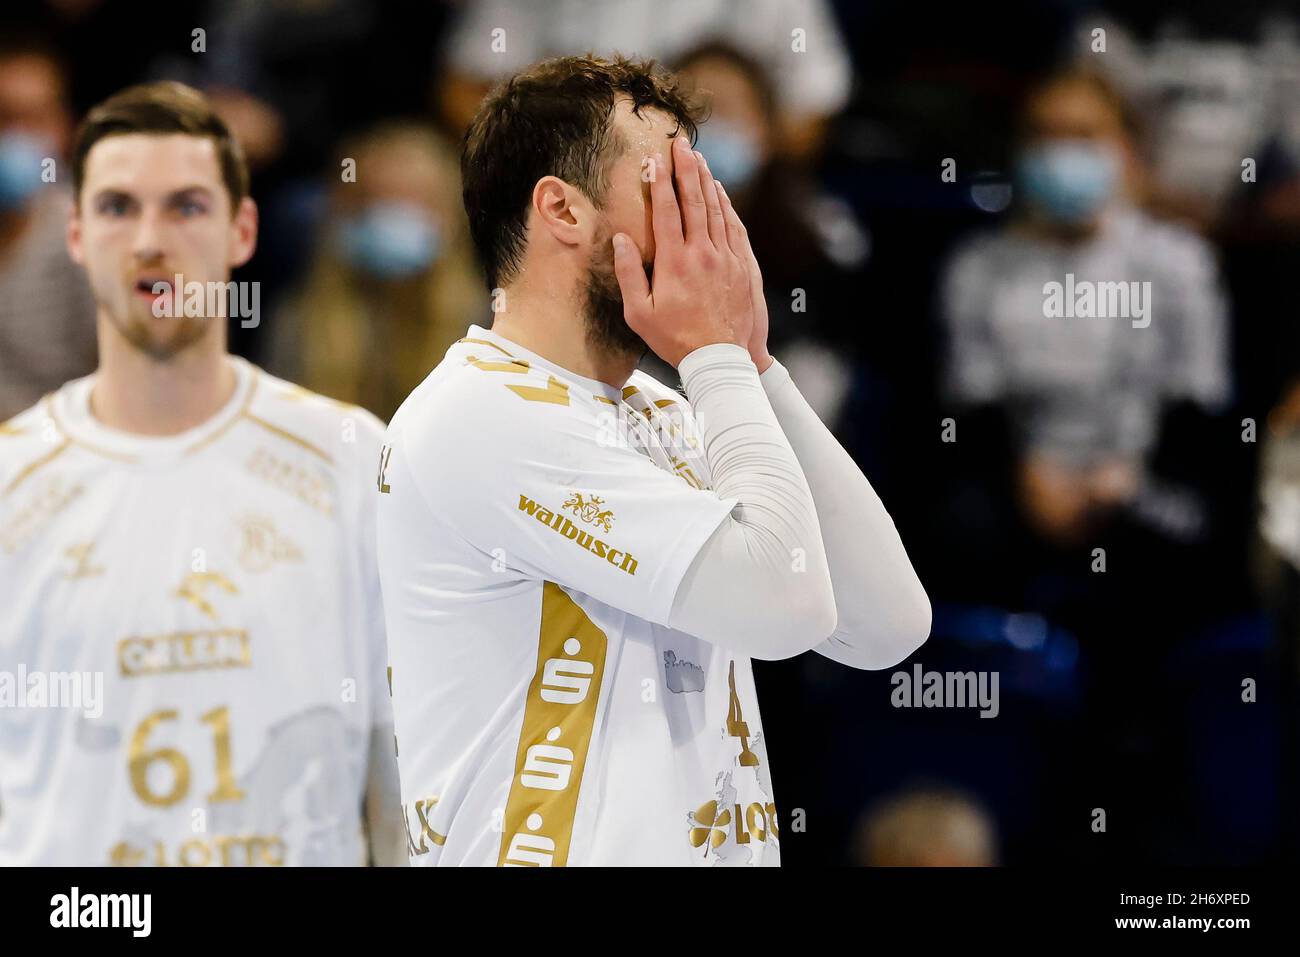 Kiel, Germany. 18th Nov, 2021. Handball: Champions League, THW Kiel -  Aalborg HB, Group Stage, Group A, Matchday 7, Wunderino Arena. Kiel's  Domagoj Duvnjak reacts disappointed after a time penalty. Credit: Frank